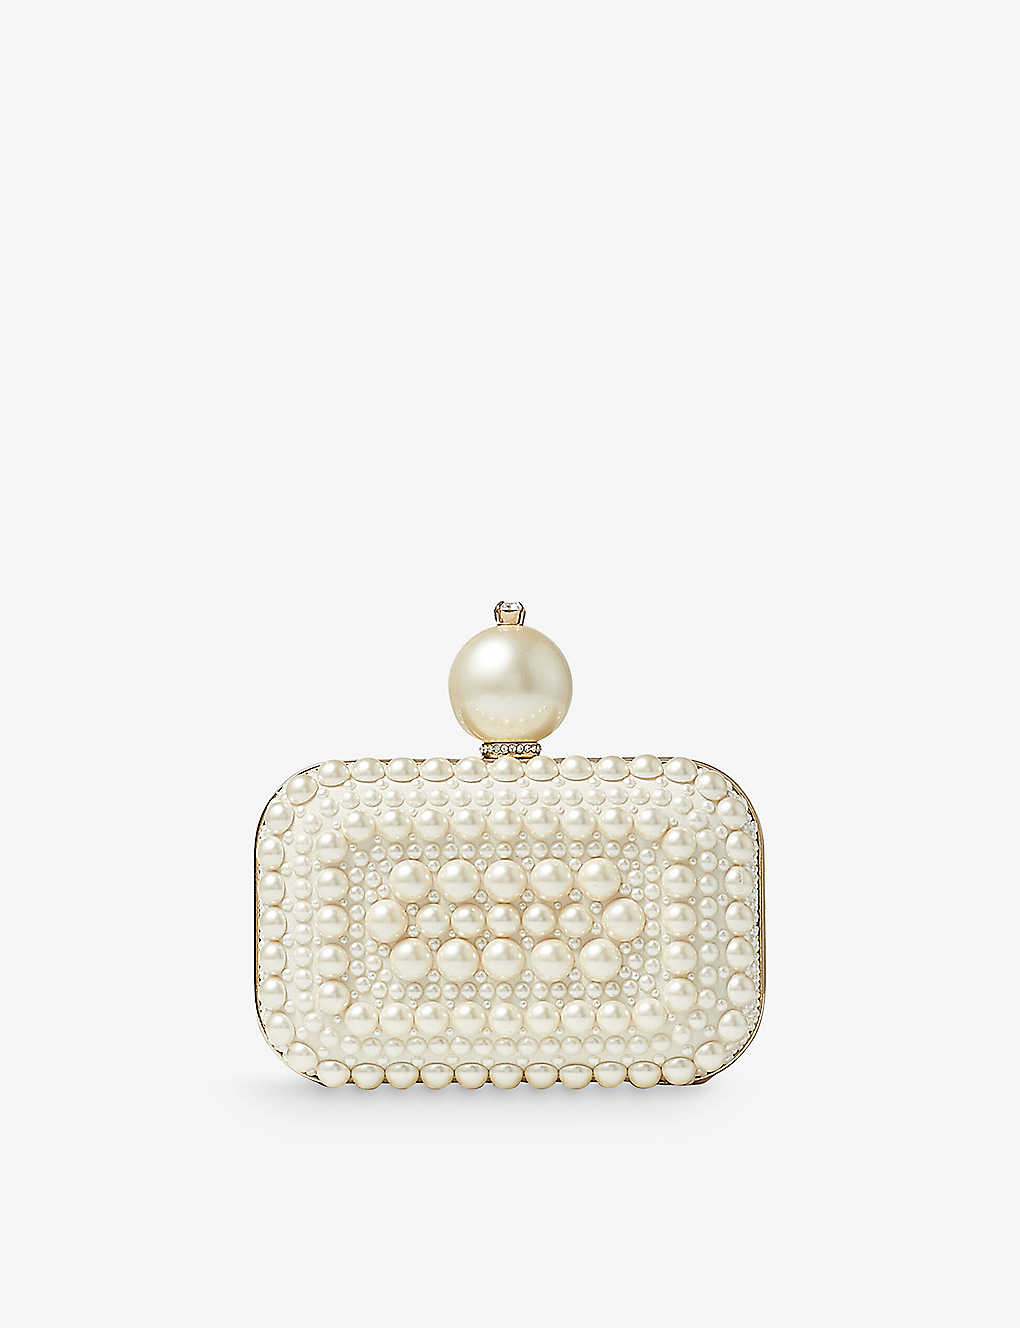 Jimmy Choo Micro Cloud Pearl And Crystal-embellished Suede Clutch Bag In White/white